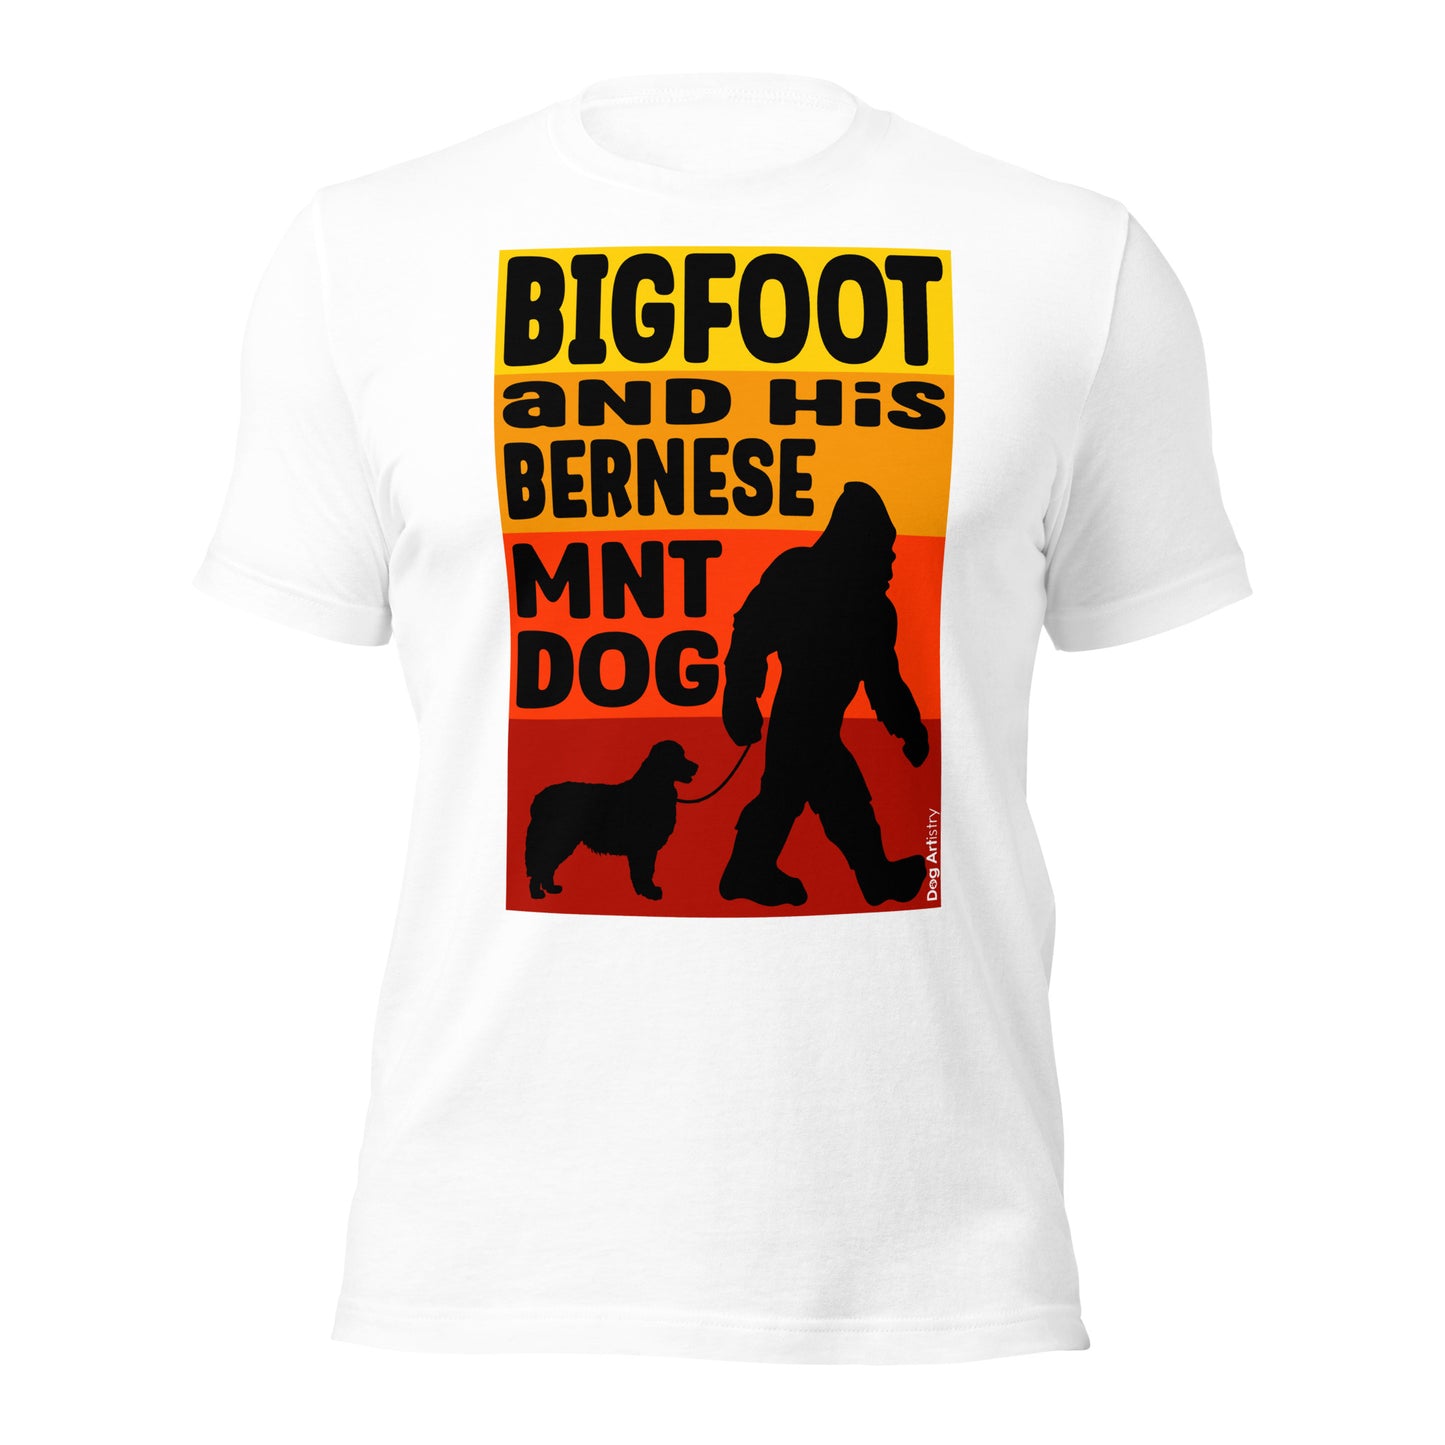 Big foot and his Bernese Mountain Dog unisex white t-shirt by Dog Artistry.